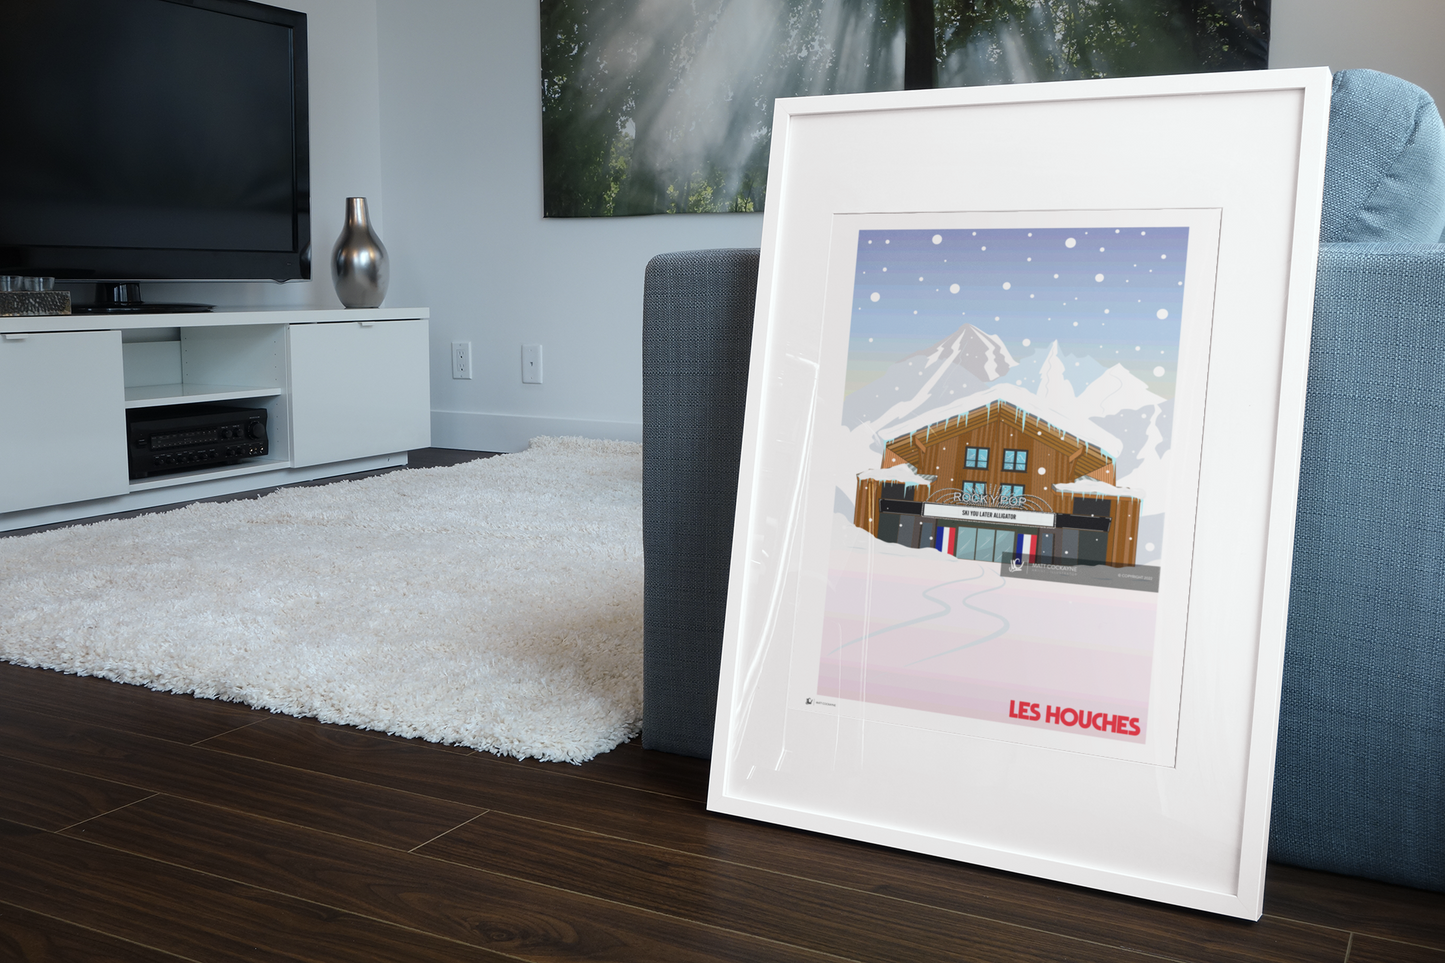 Les Houches - Wall art - print - canvas - poster - illustration